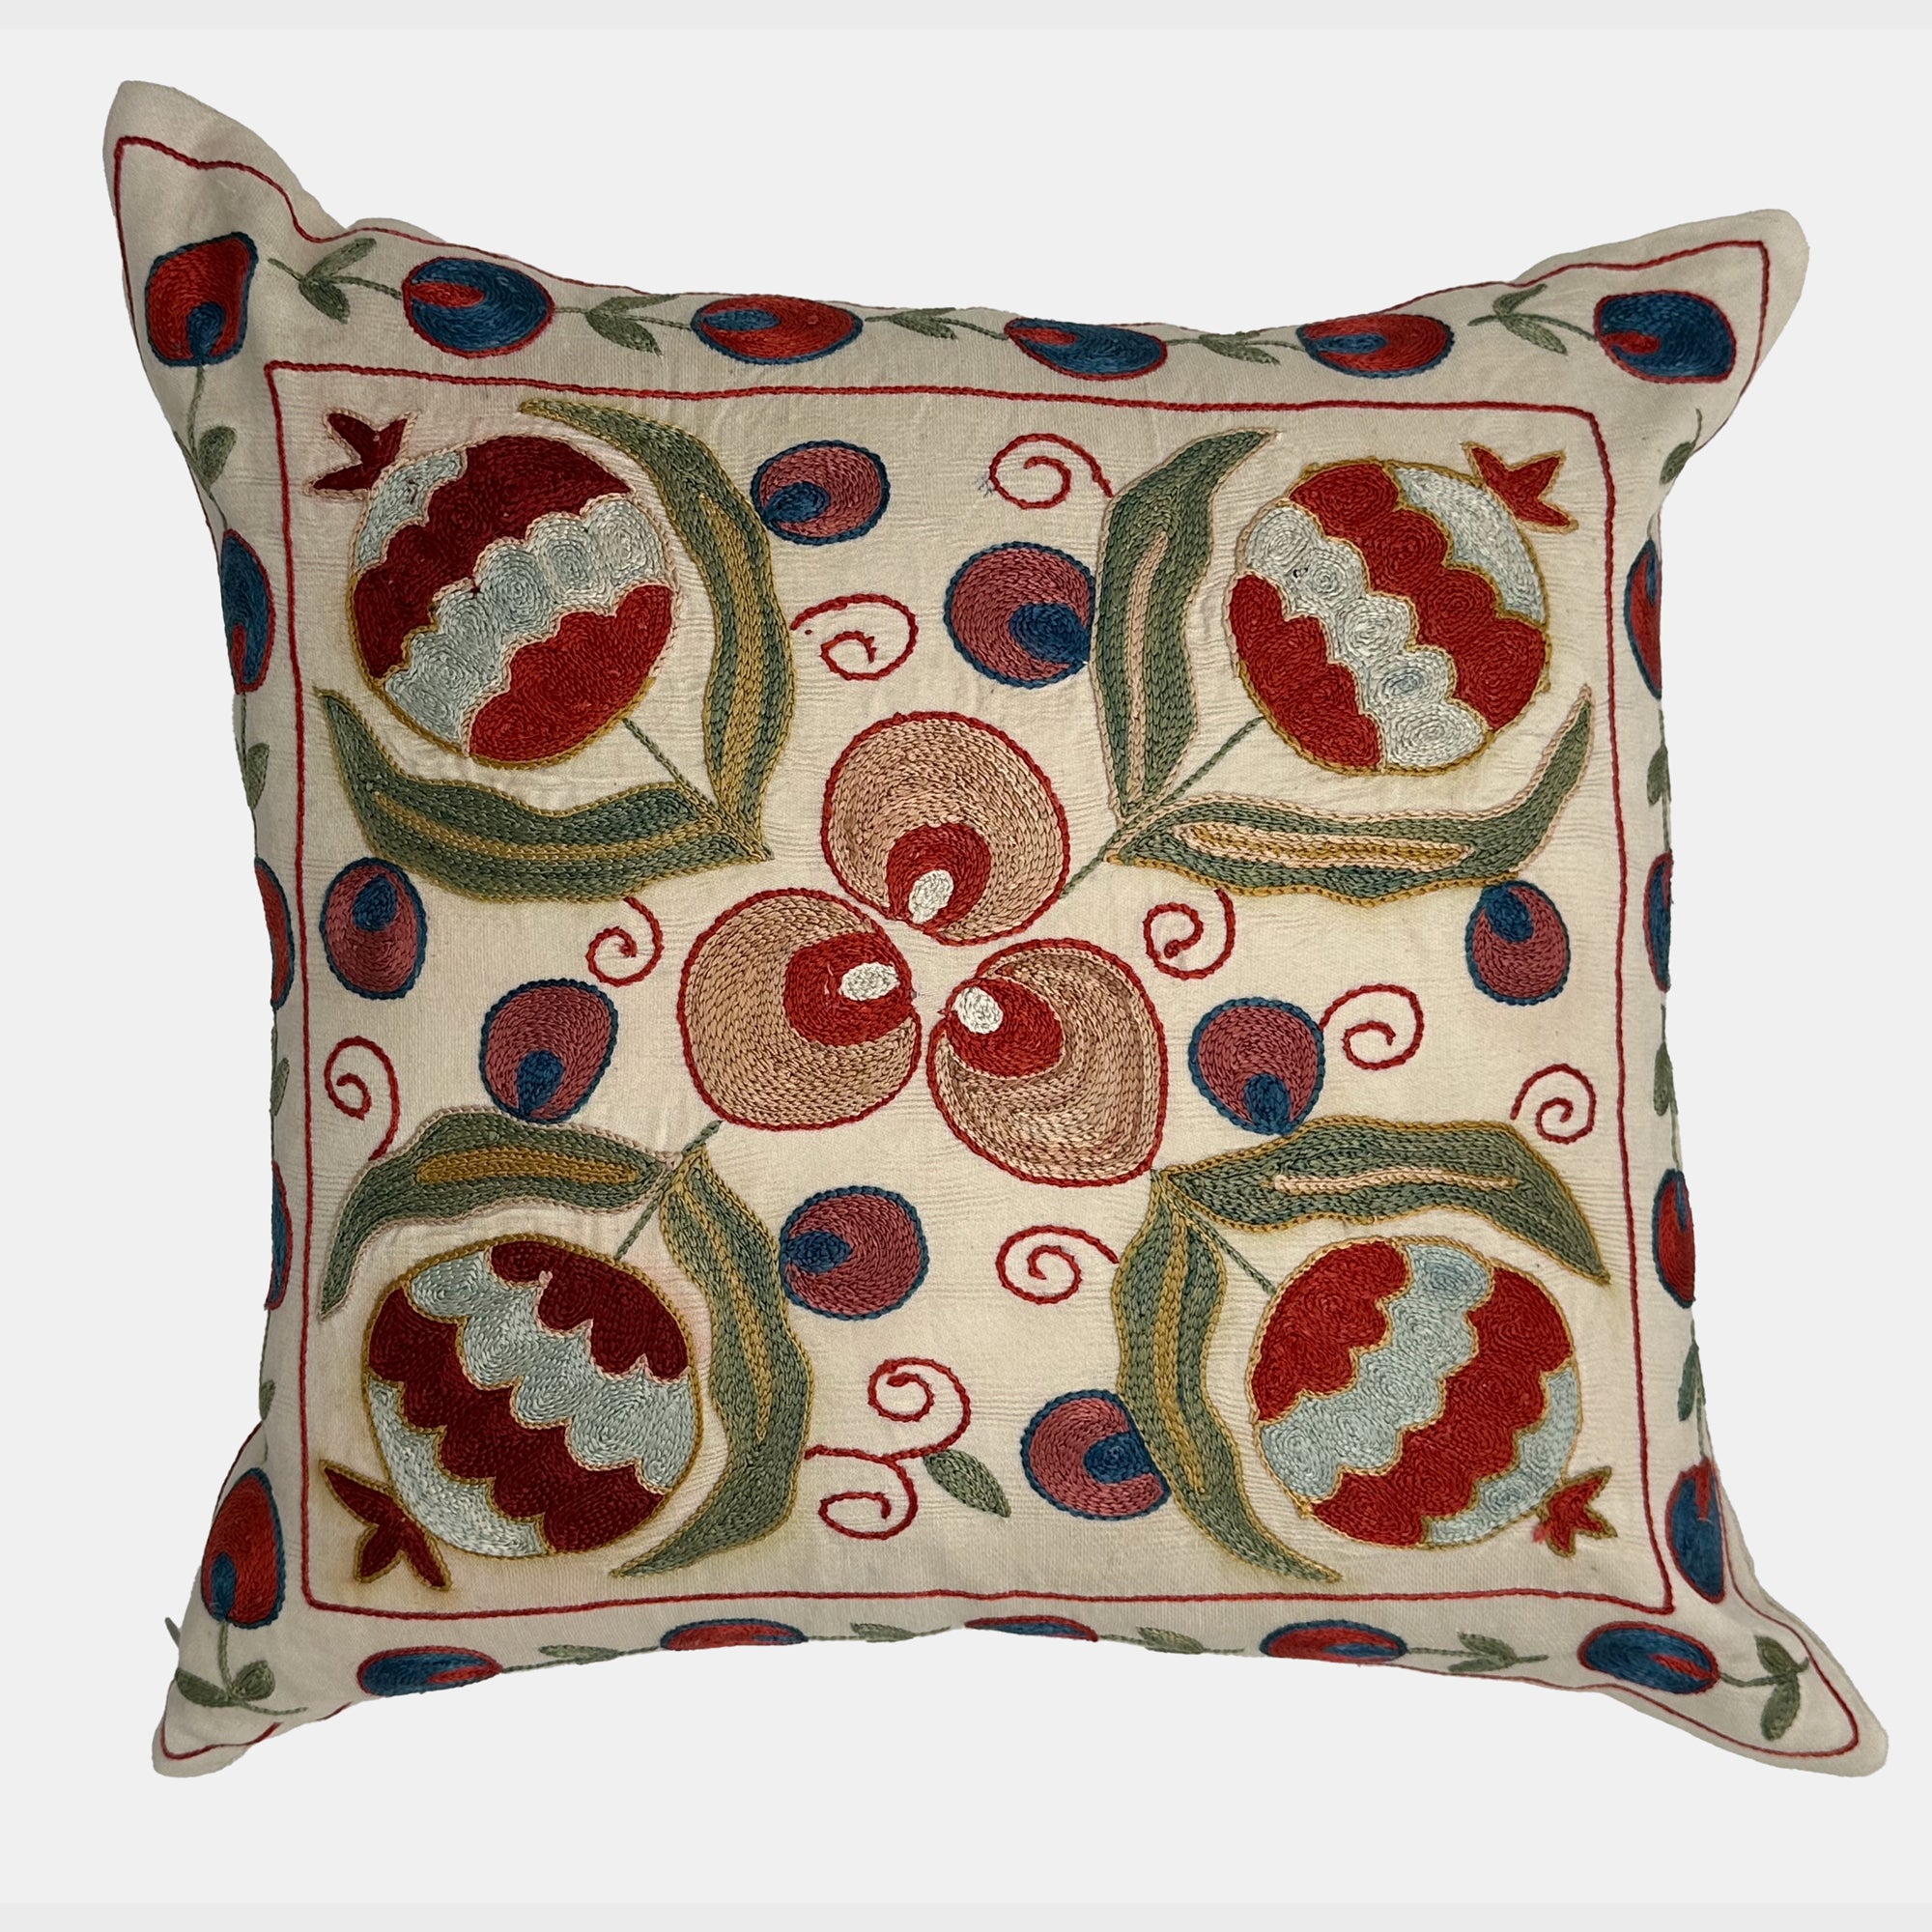 One of a Kind Peach Floral Suzani Pillow, square